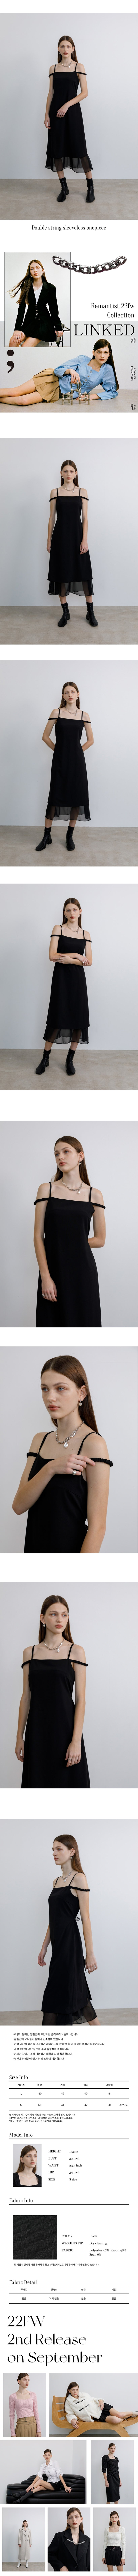 Double string sleeveless onepiece (black)